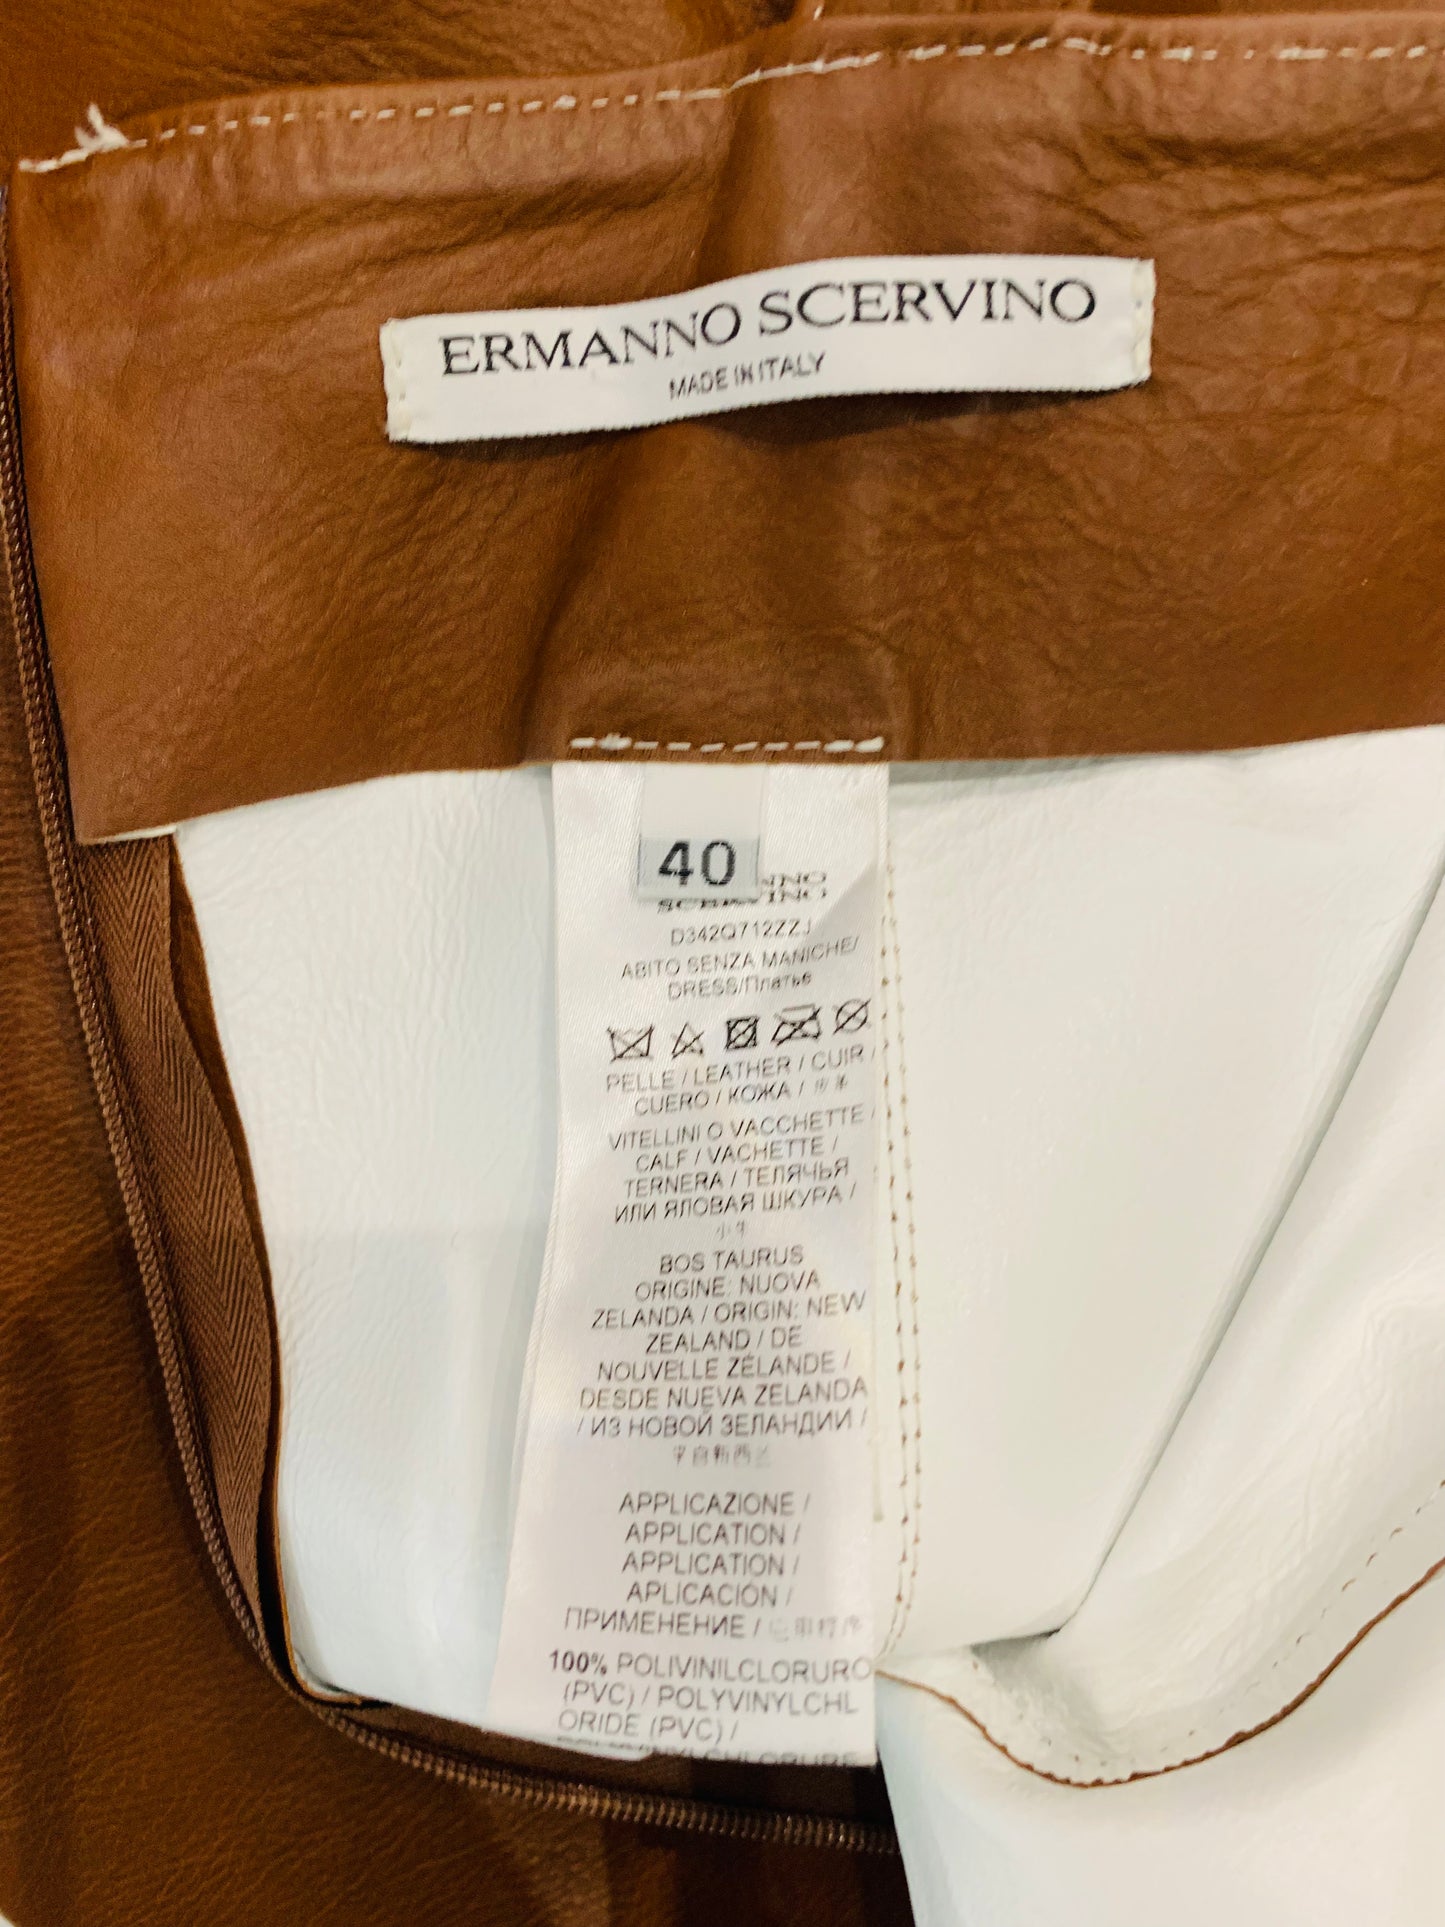 ERMANNO SCERVINO - Cocktail dress brown leather size 40 IT